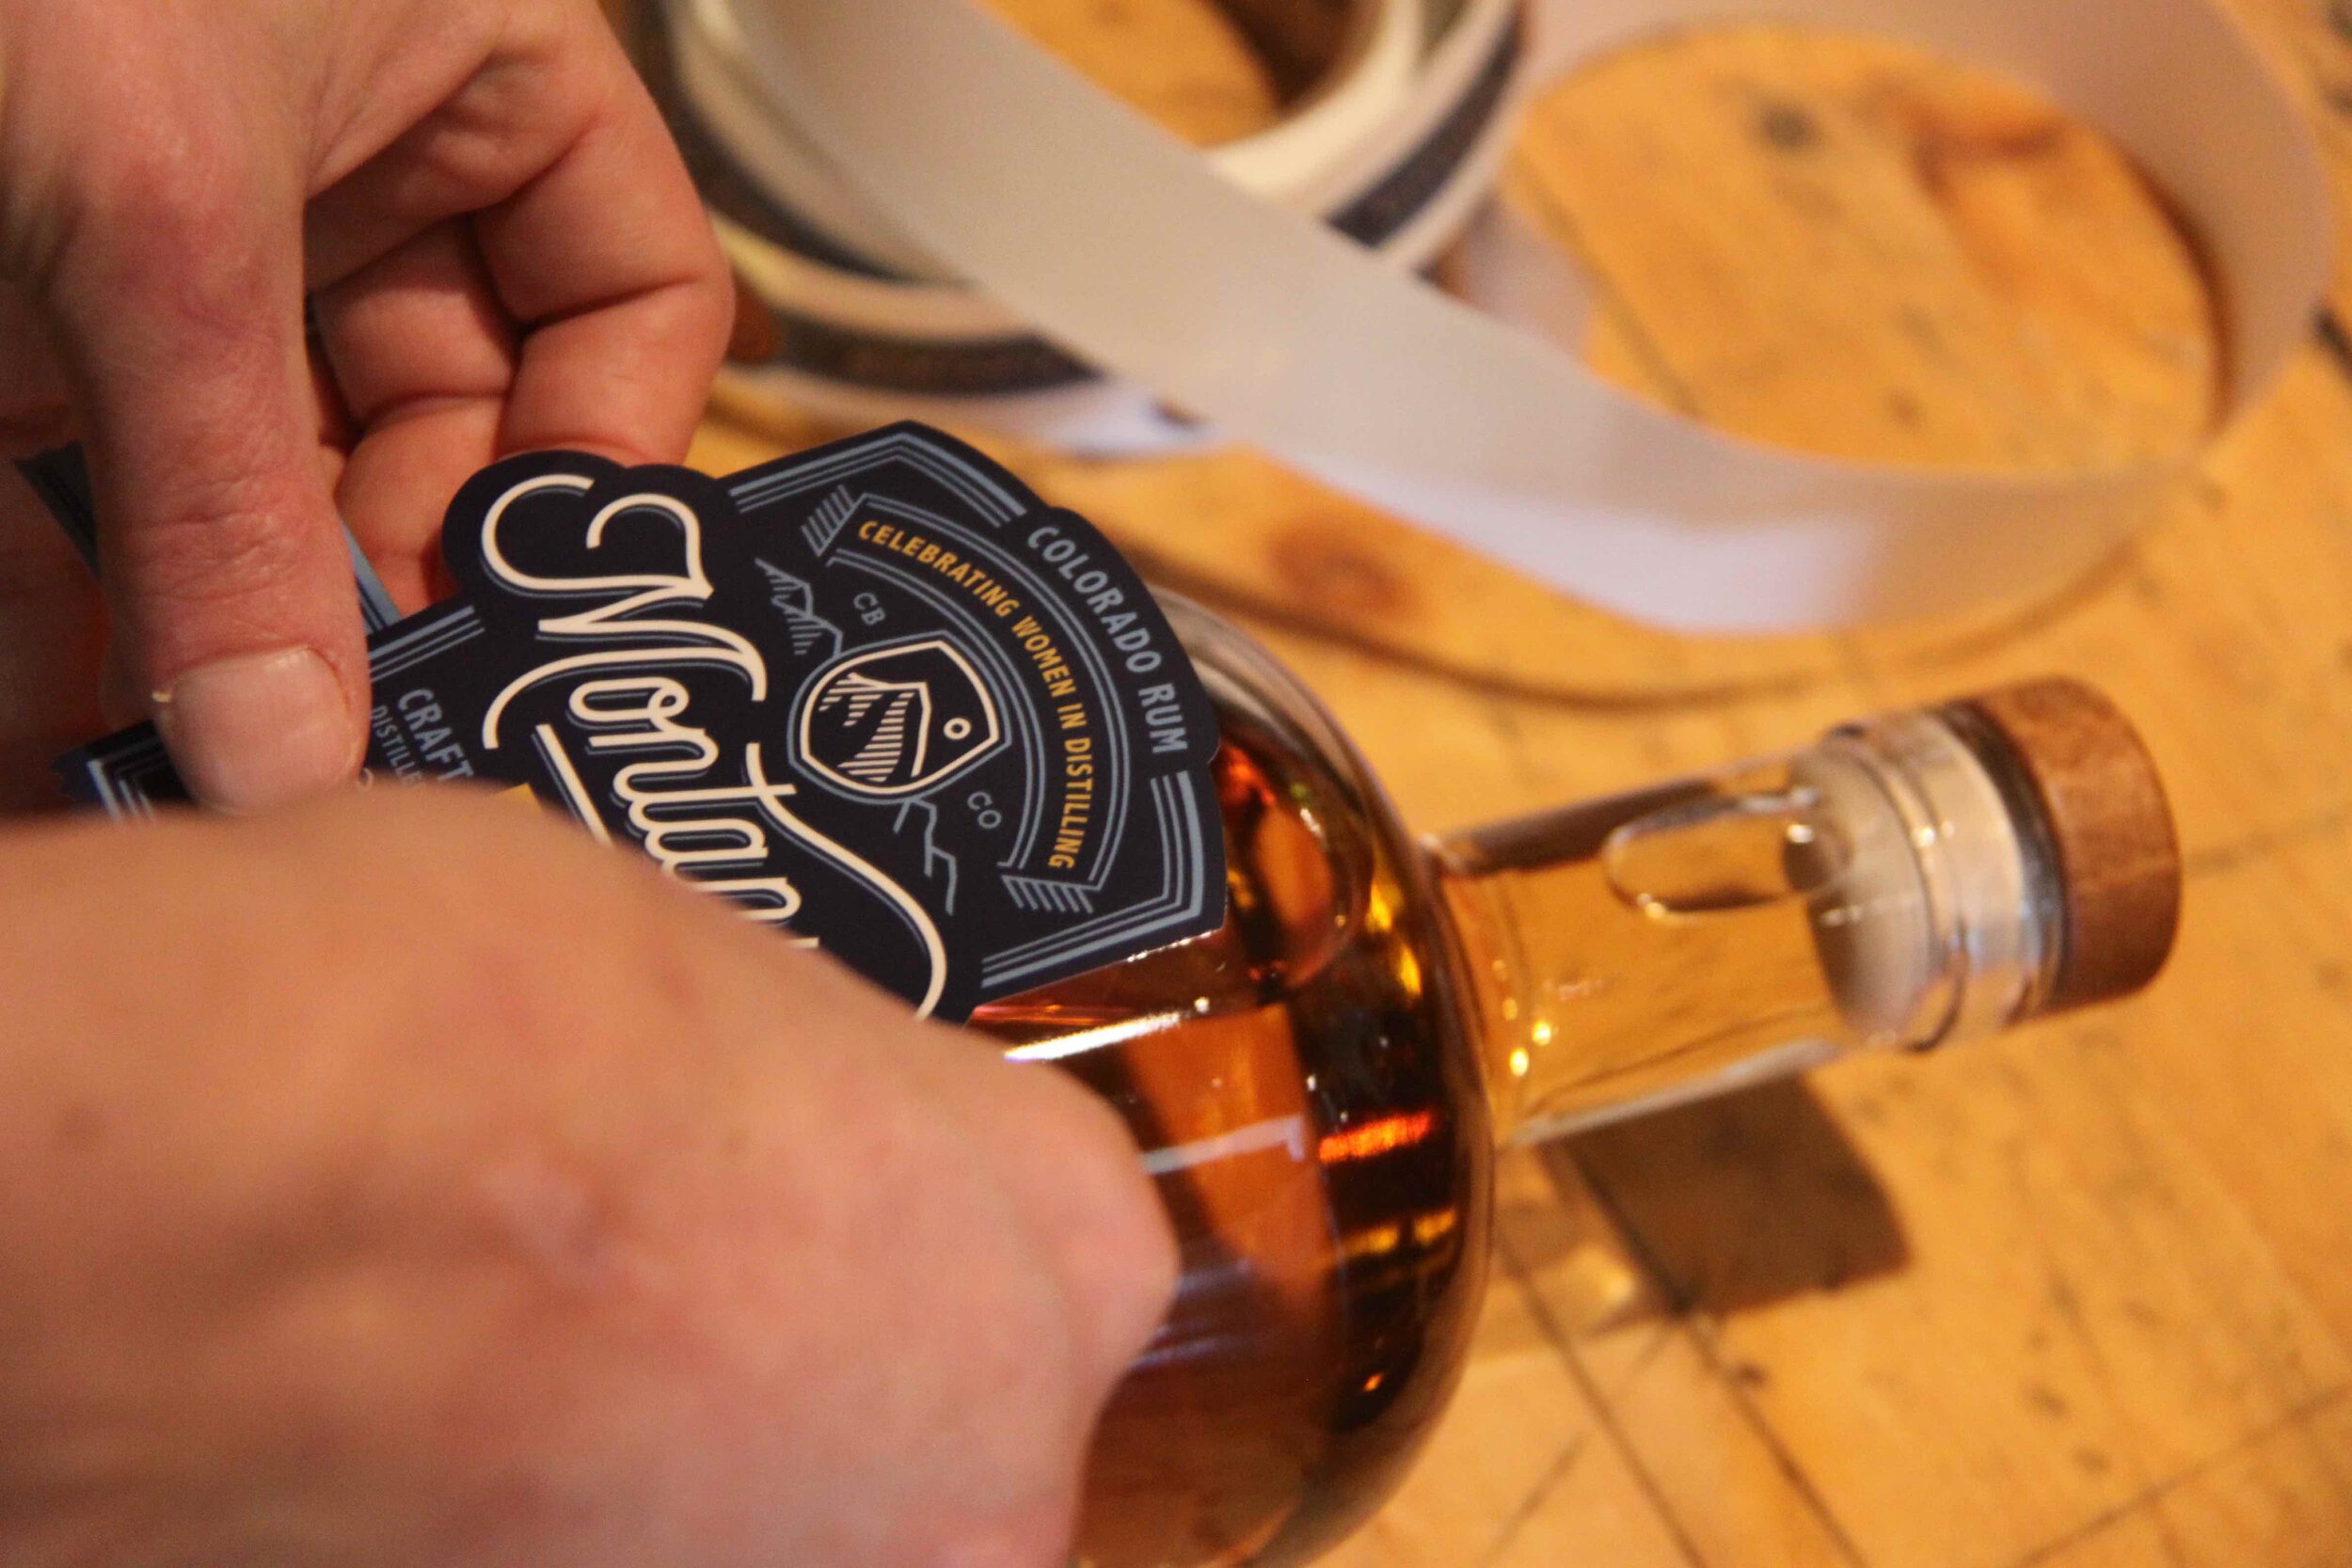 Placing a label on a bottle of Valentia (this won't always have to be done by hand).